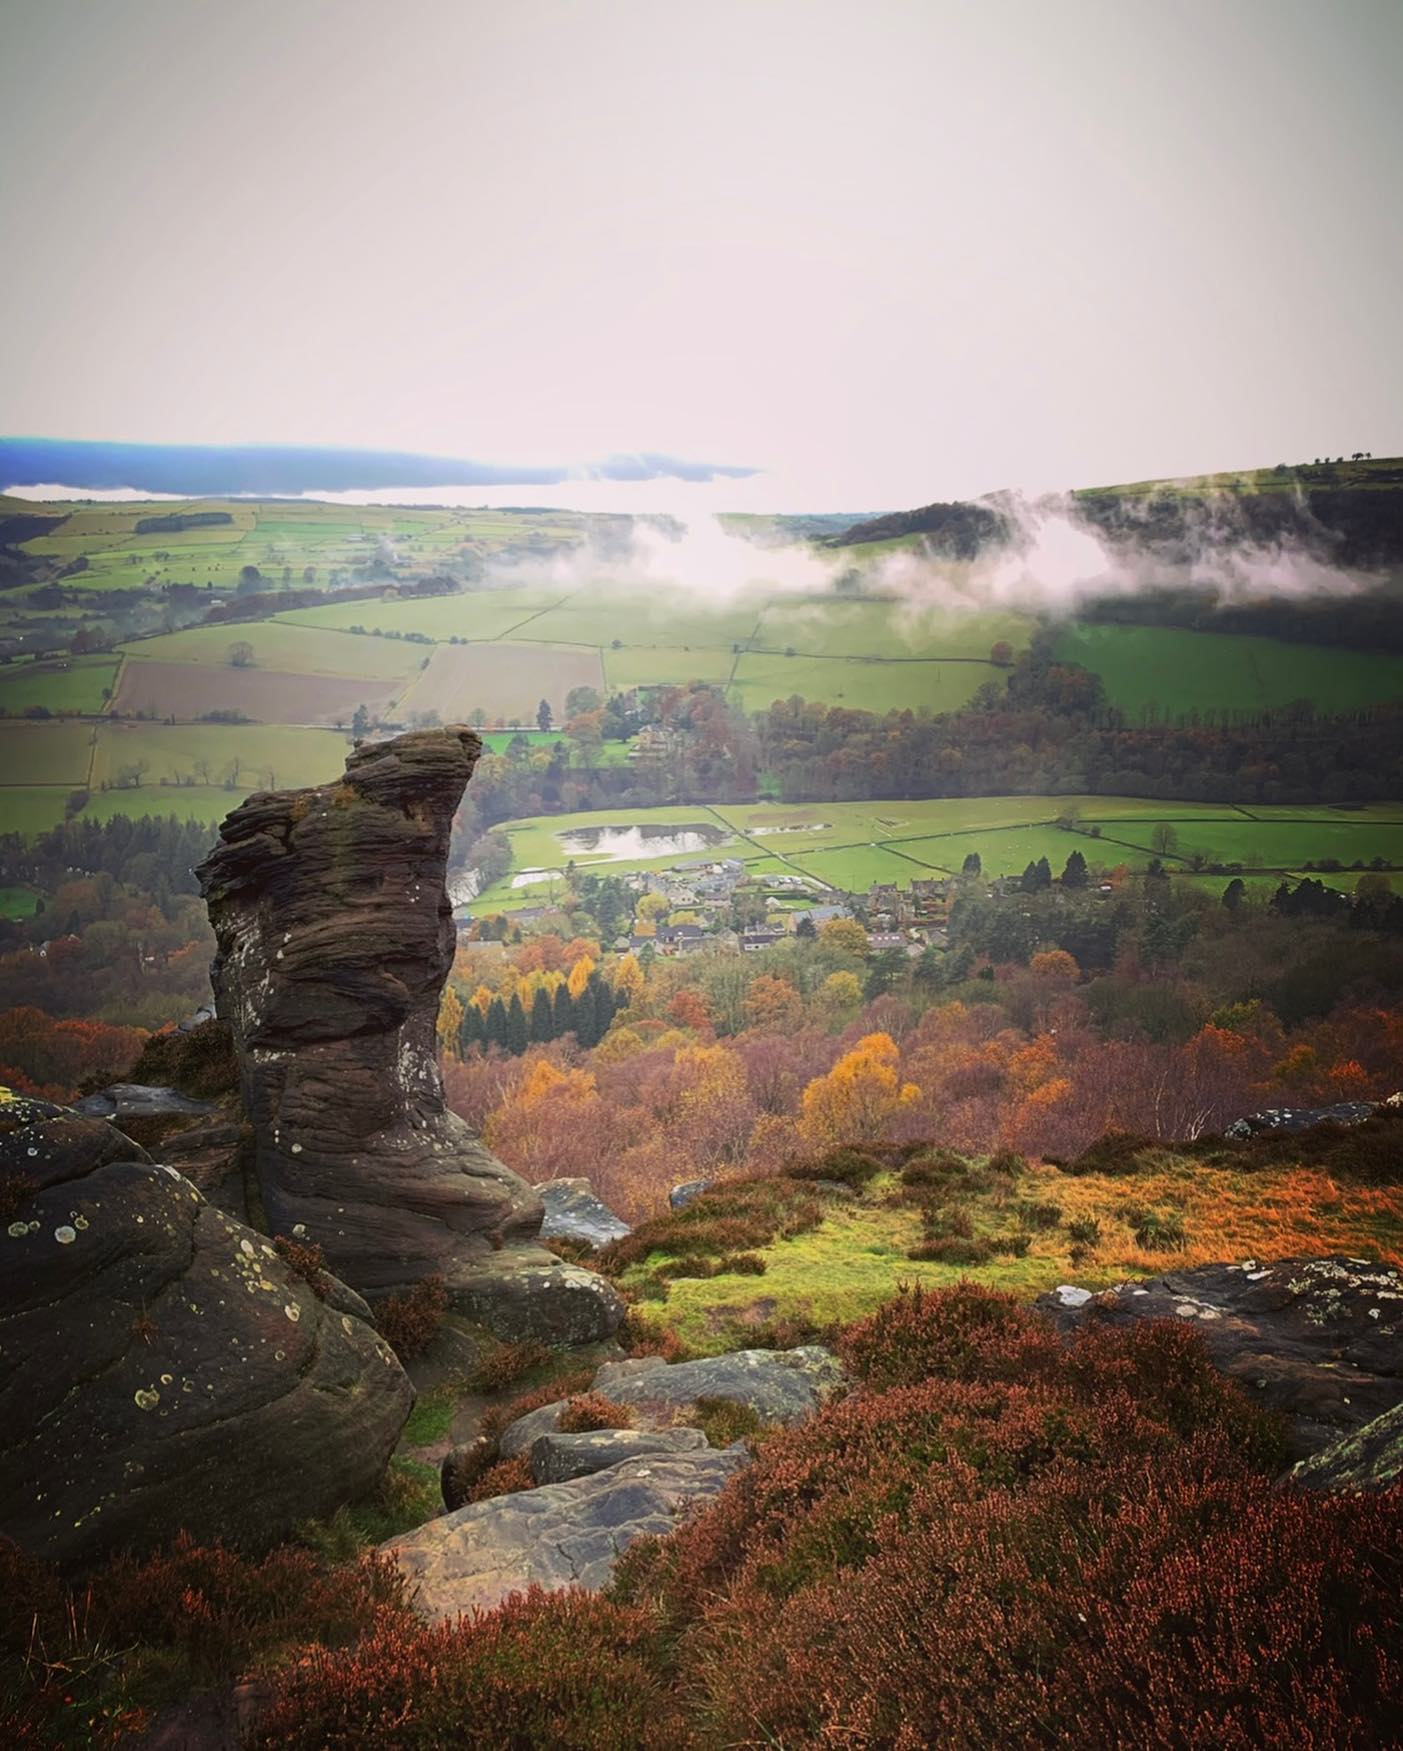 Autumn colours in the Peak District are just the best 🍁🍂🍁

#wildernessdevelopment #peakdistrict #peakdistrictnationalpark #peakdistrictwalks #peakdistrictphotography #peakdistrictchallenge #autumn #autumnvibes #autumncolors #autumnmood #autumnal #autumntime #viewslikethis #lovemyoffice #outdooroffice #blowthosecobwebsaway